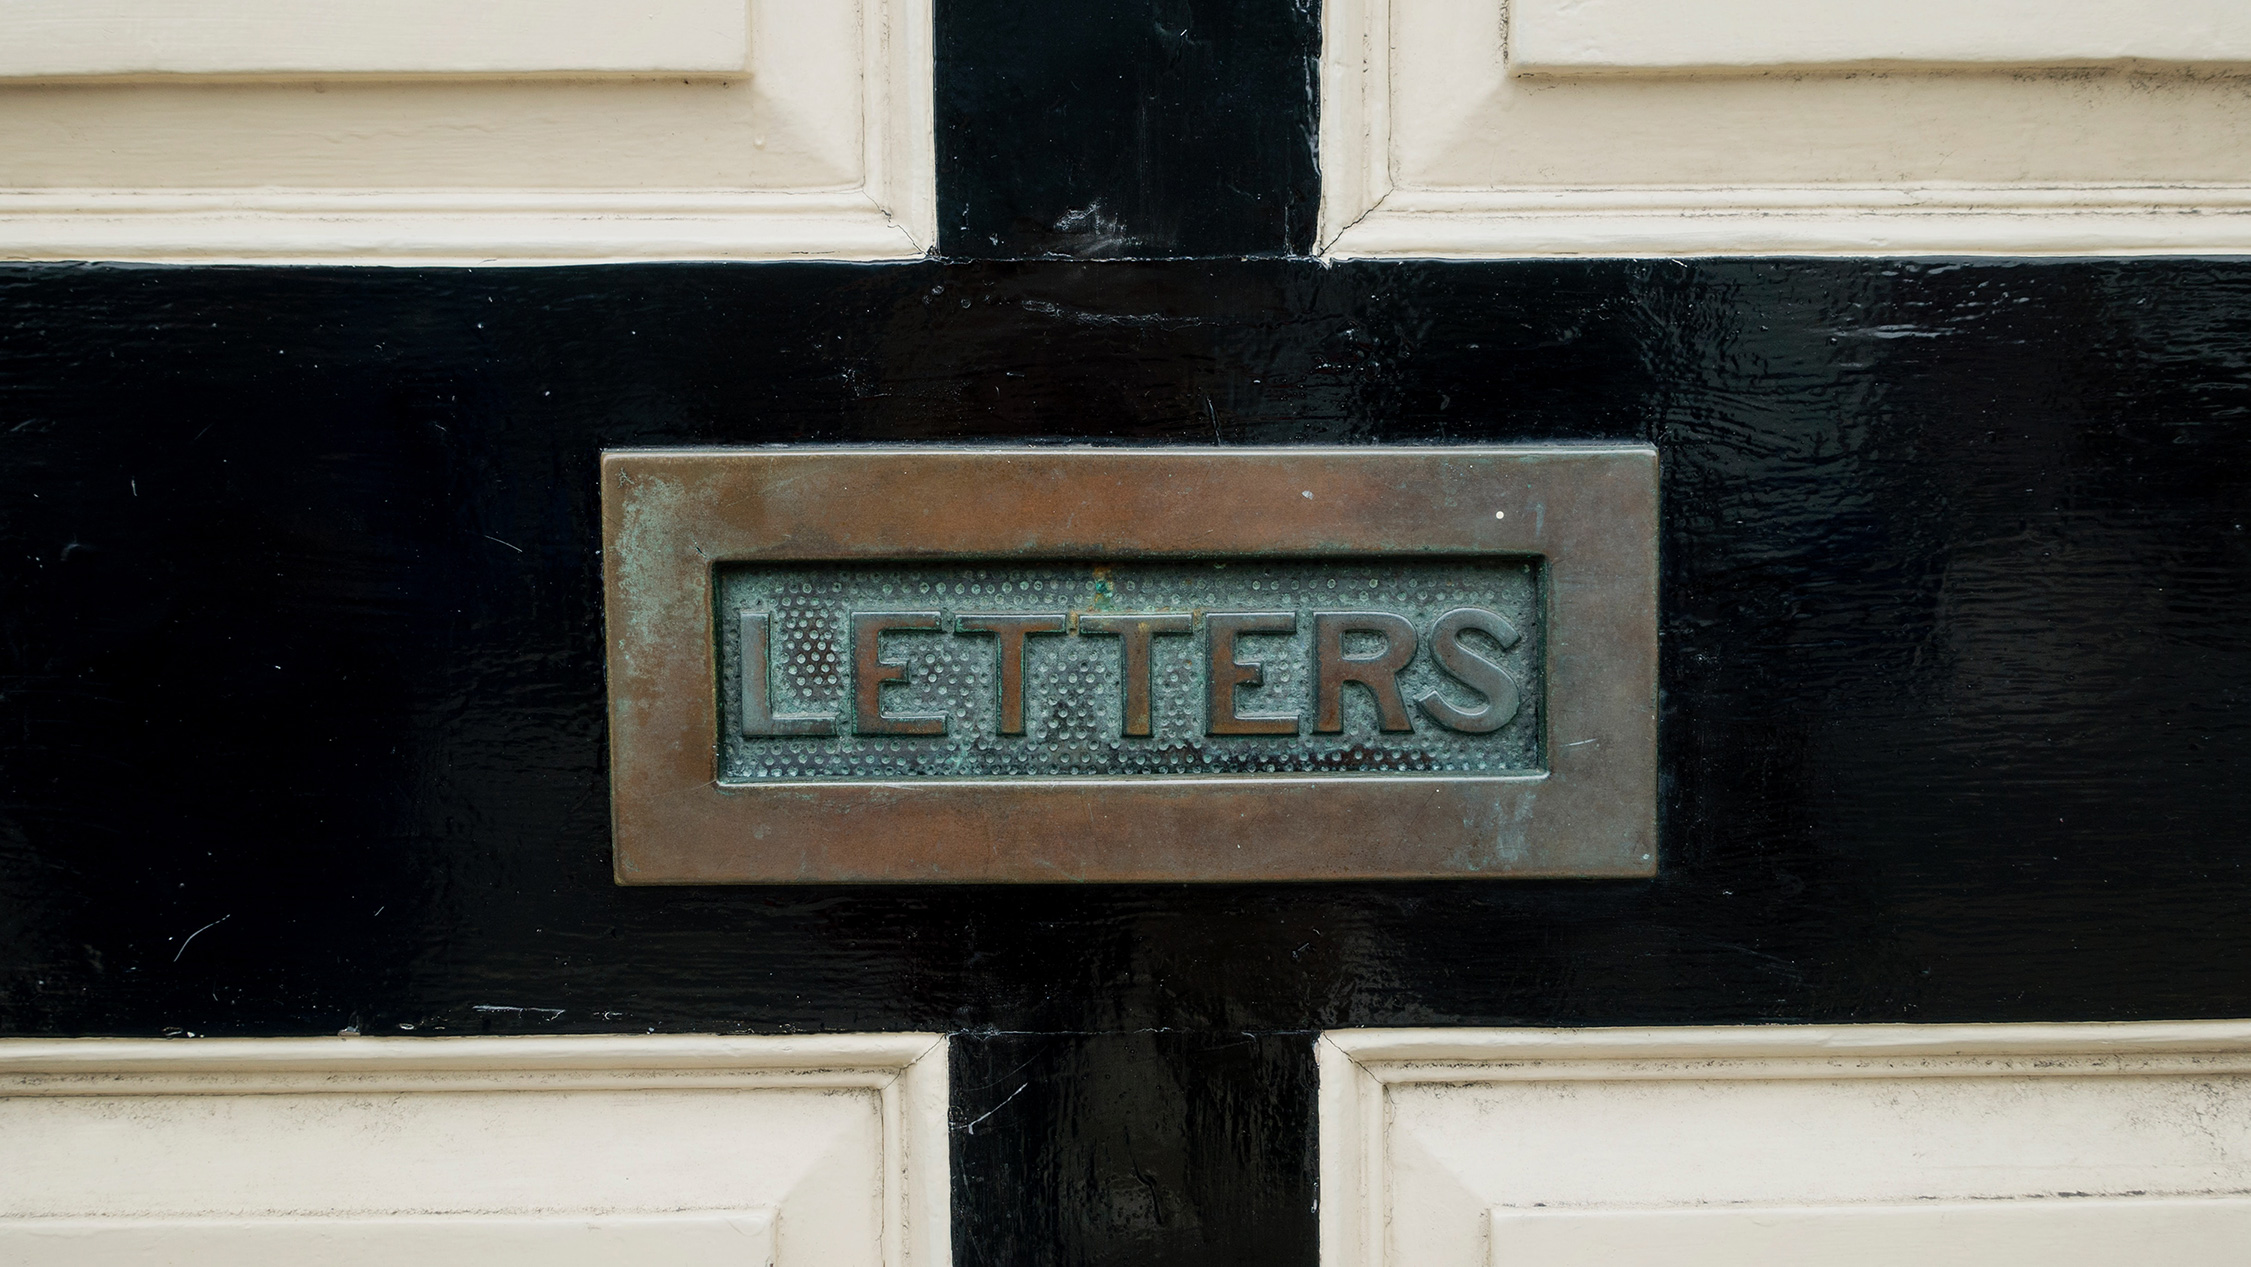 A letter slot in a door that says "Letters"